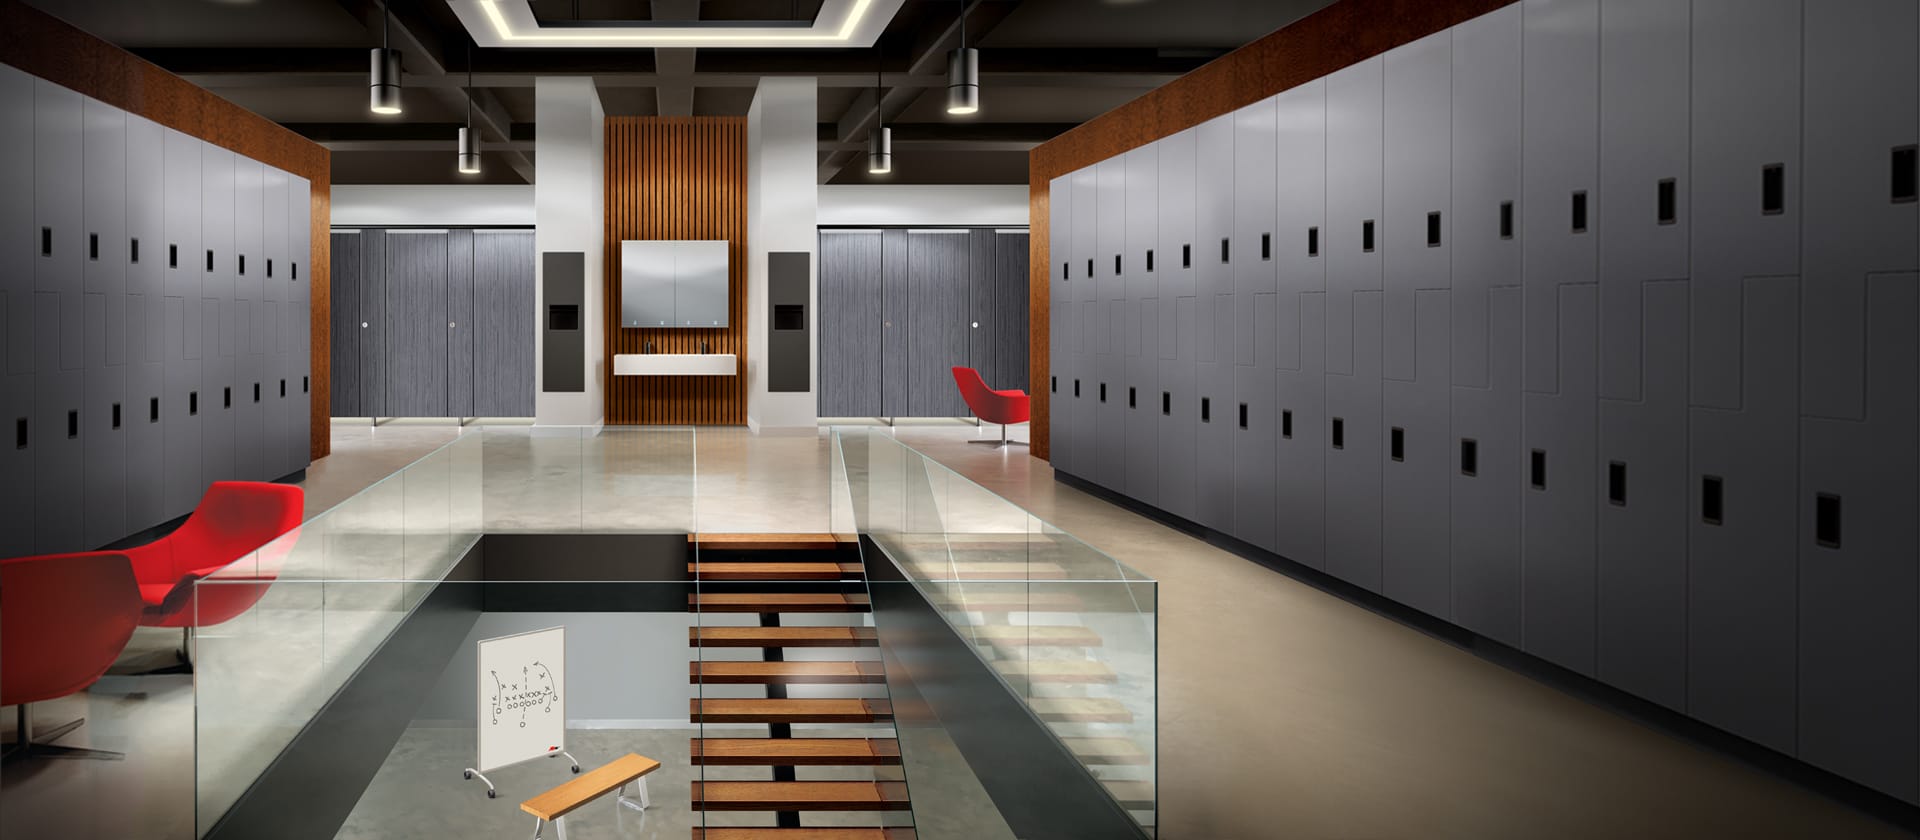 Rendering of a conference room